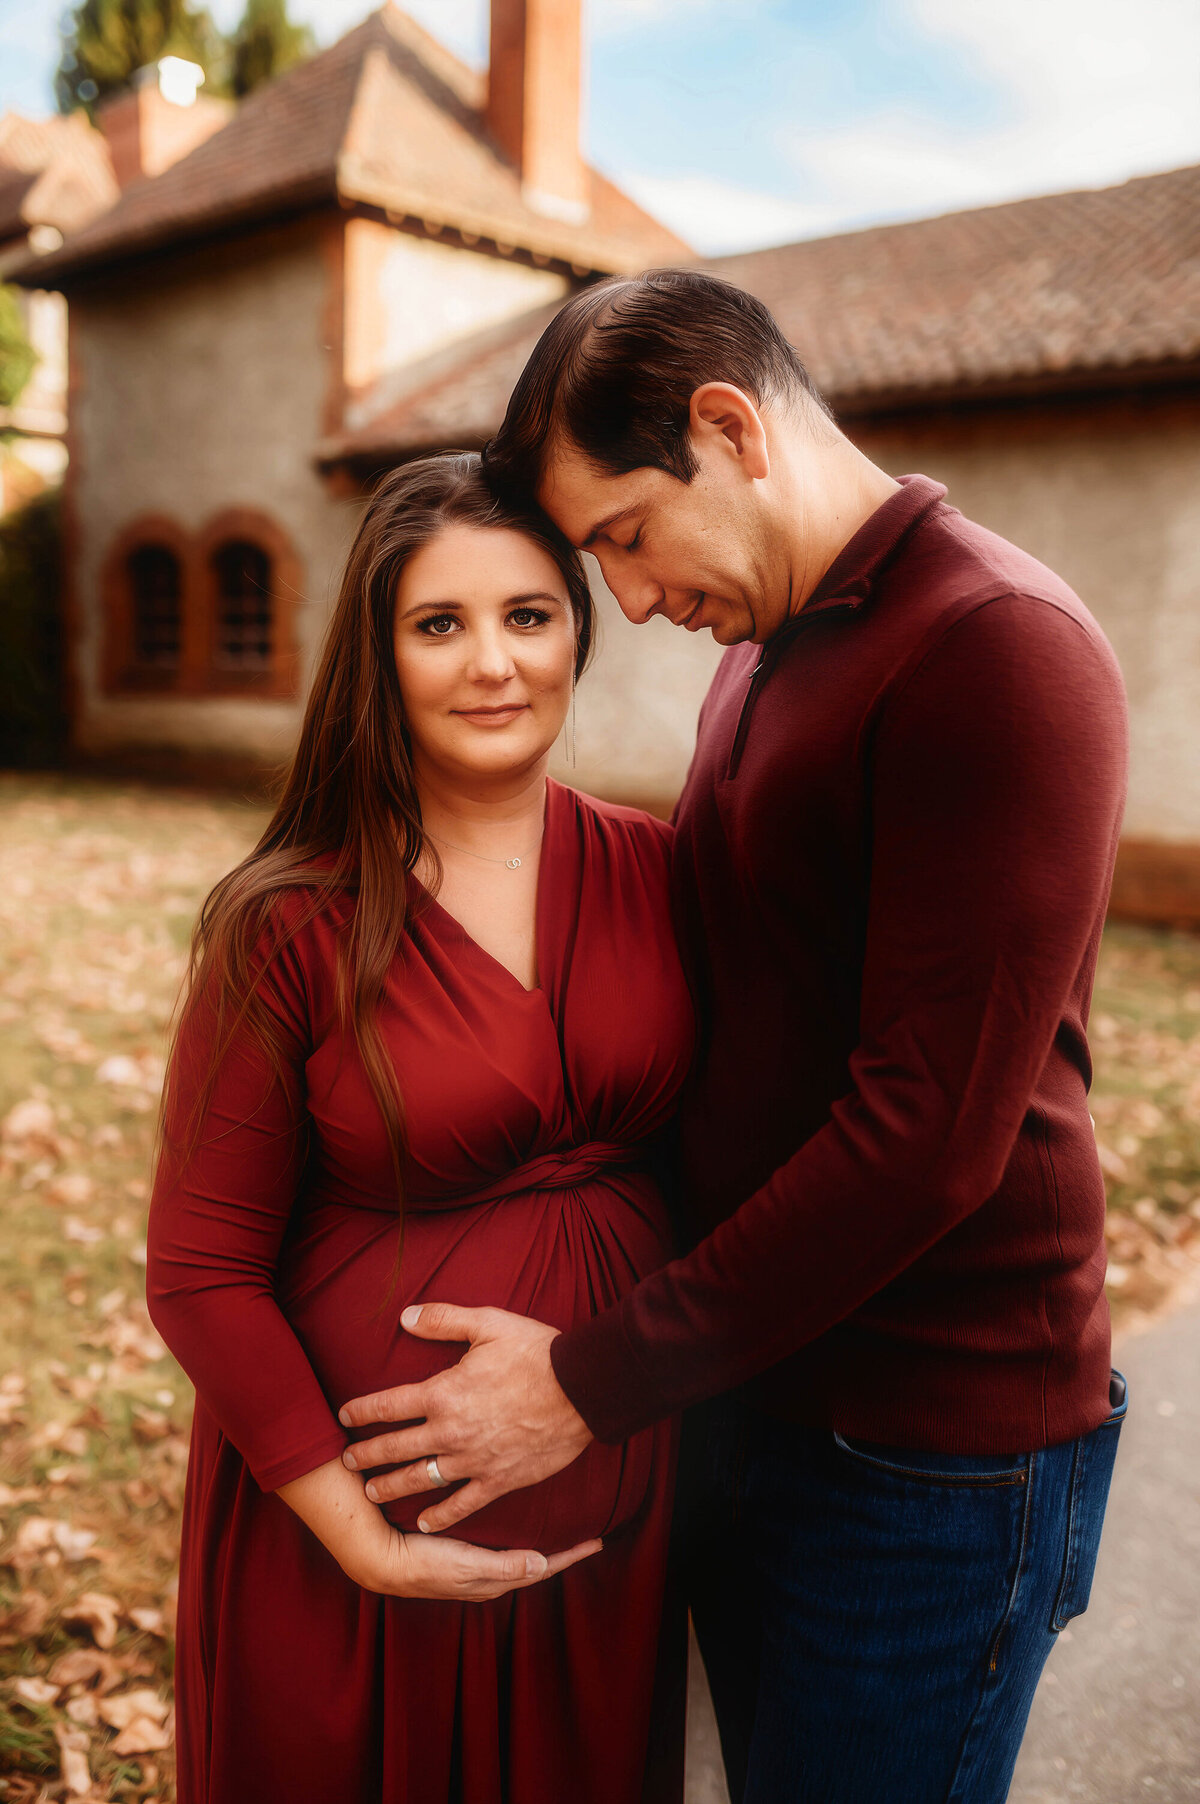 Pregnant parents embrace during for photos during Maternity Portrait Session at Biltmore Estate in Asheville, NC.